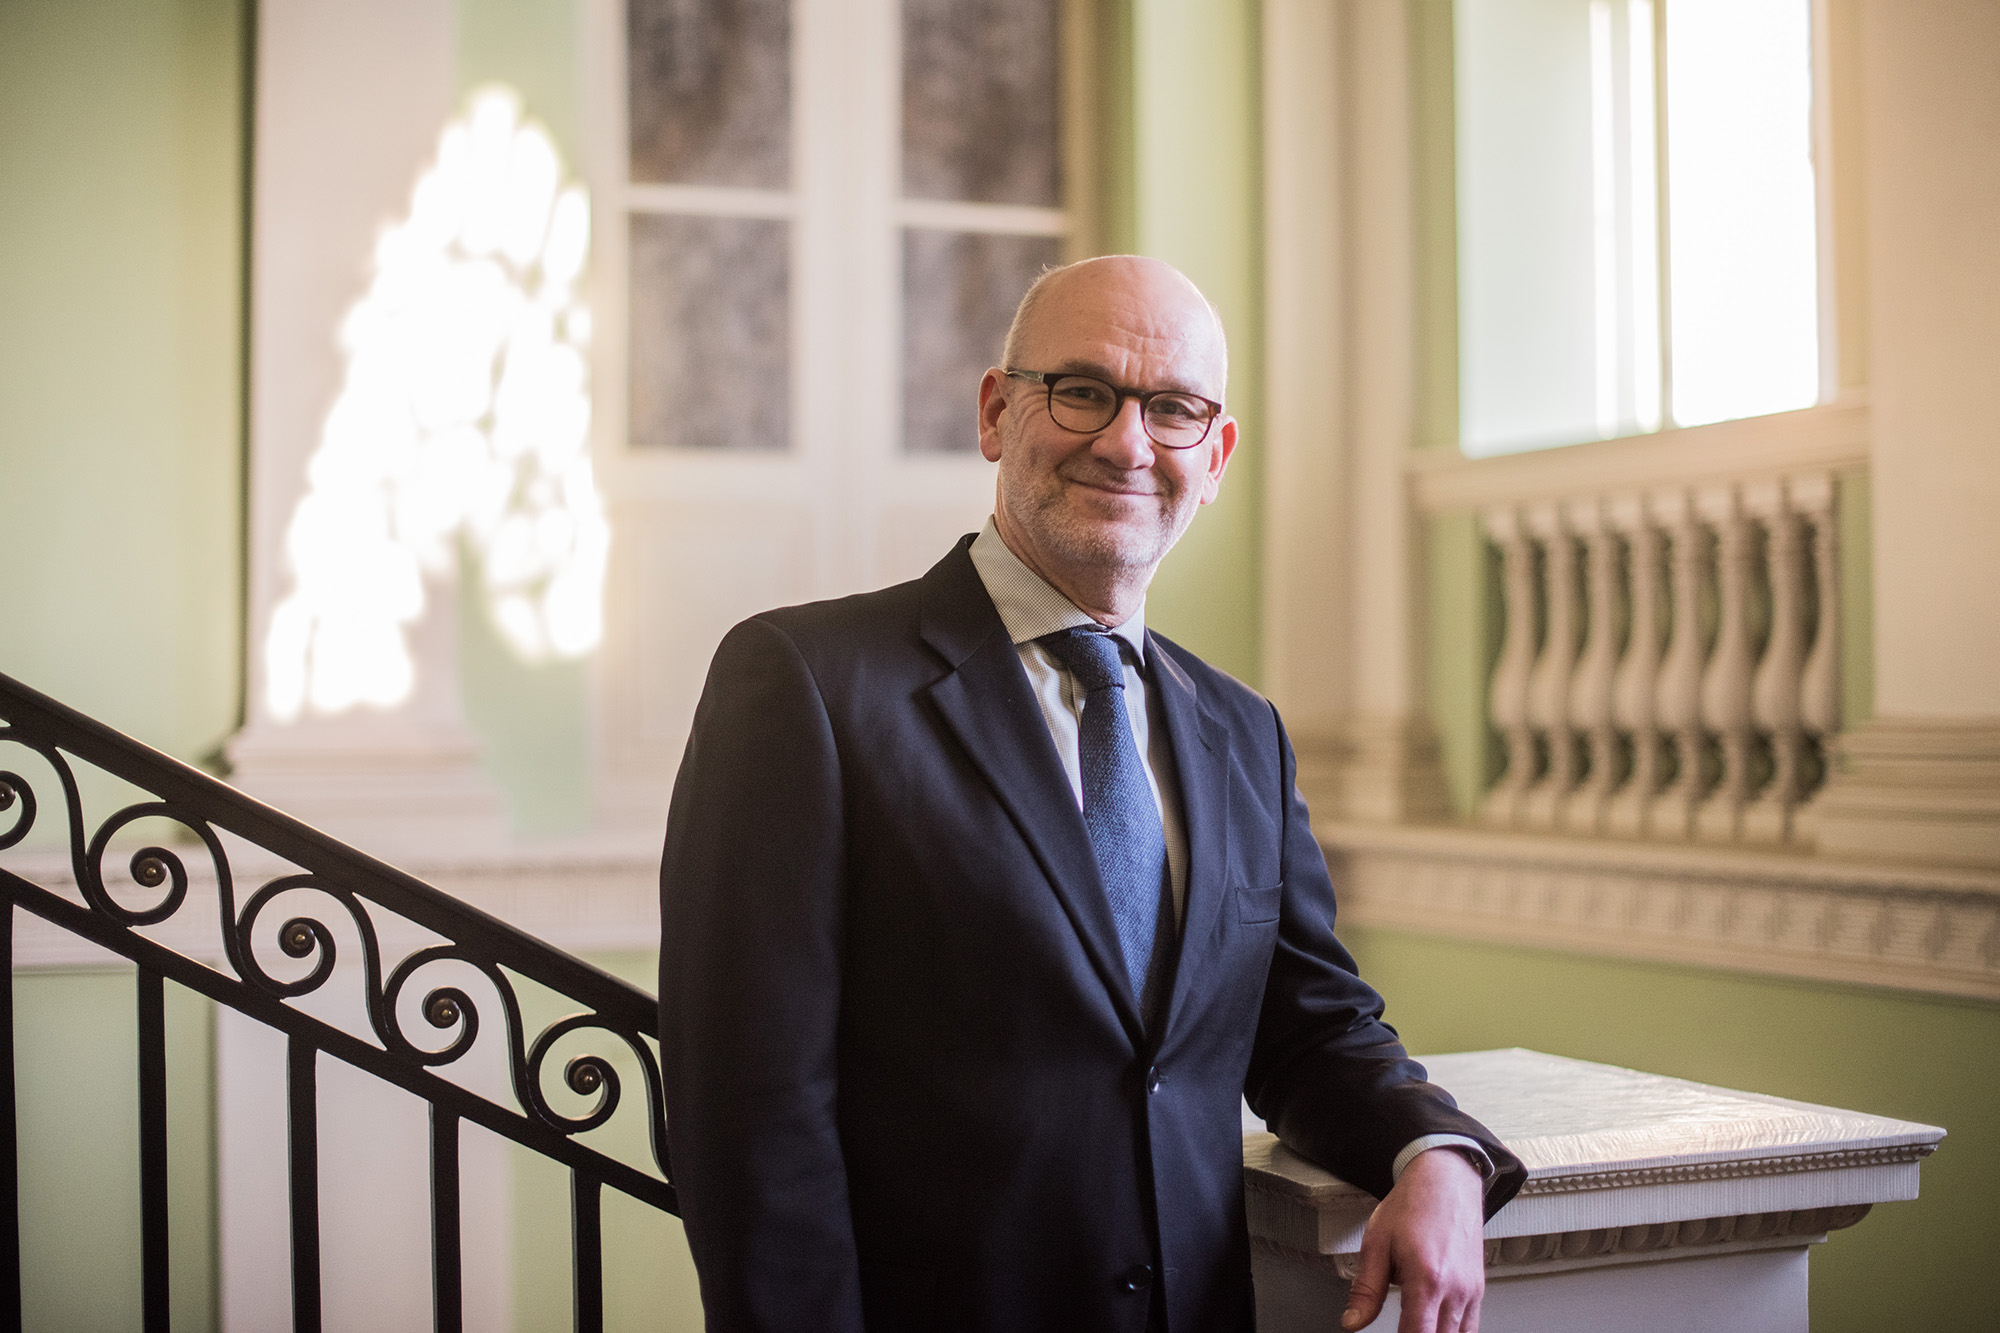 Deputy Chancellor of Justice Mikko Puumalainen smiling and wearing a suit in the Government Palace.